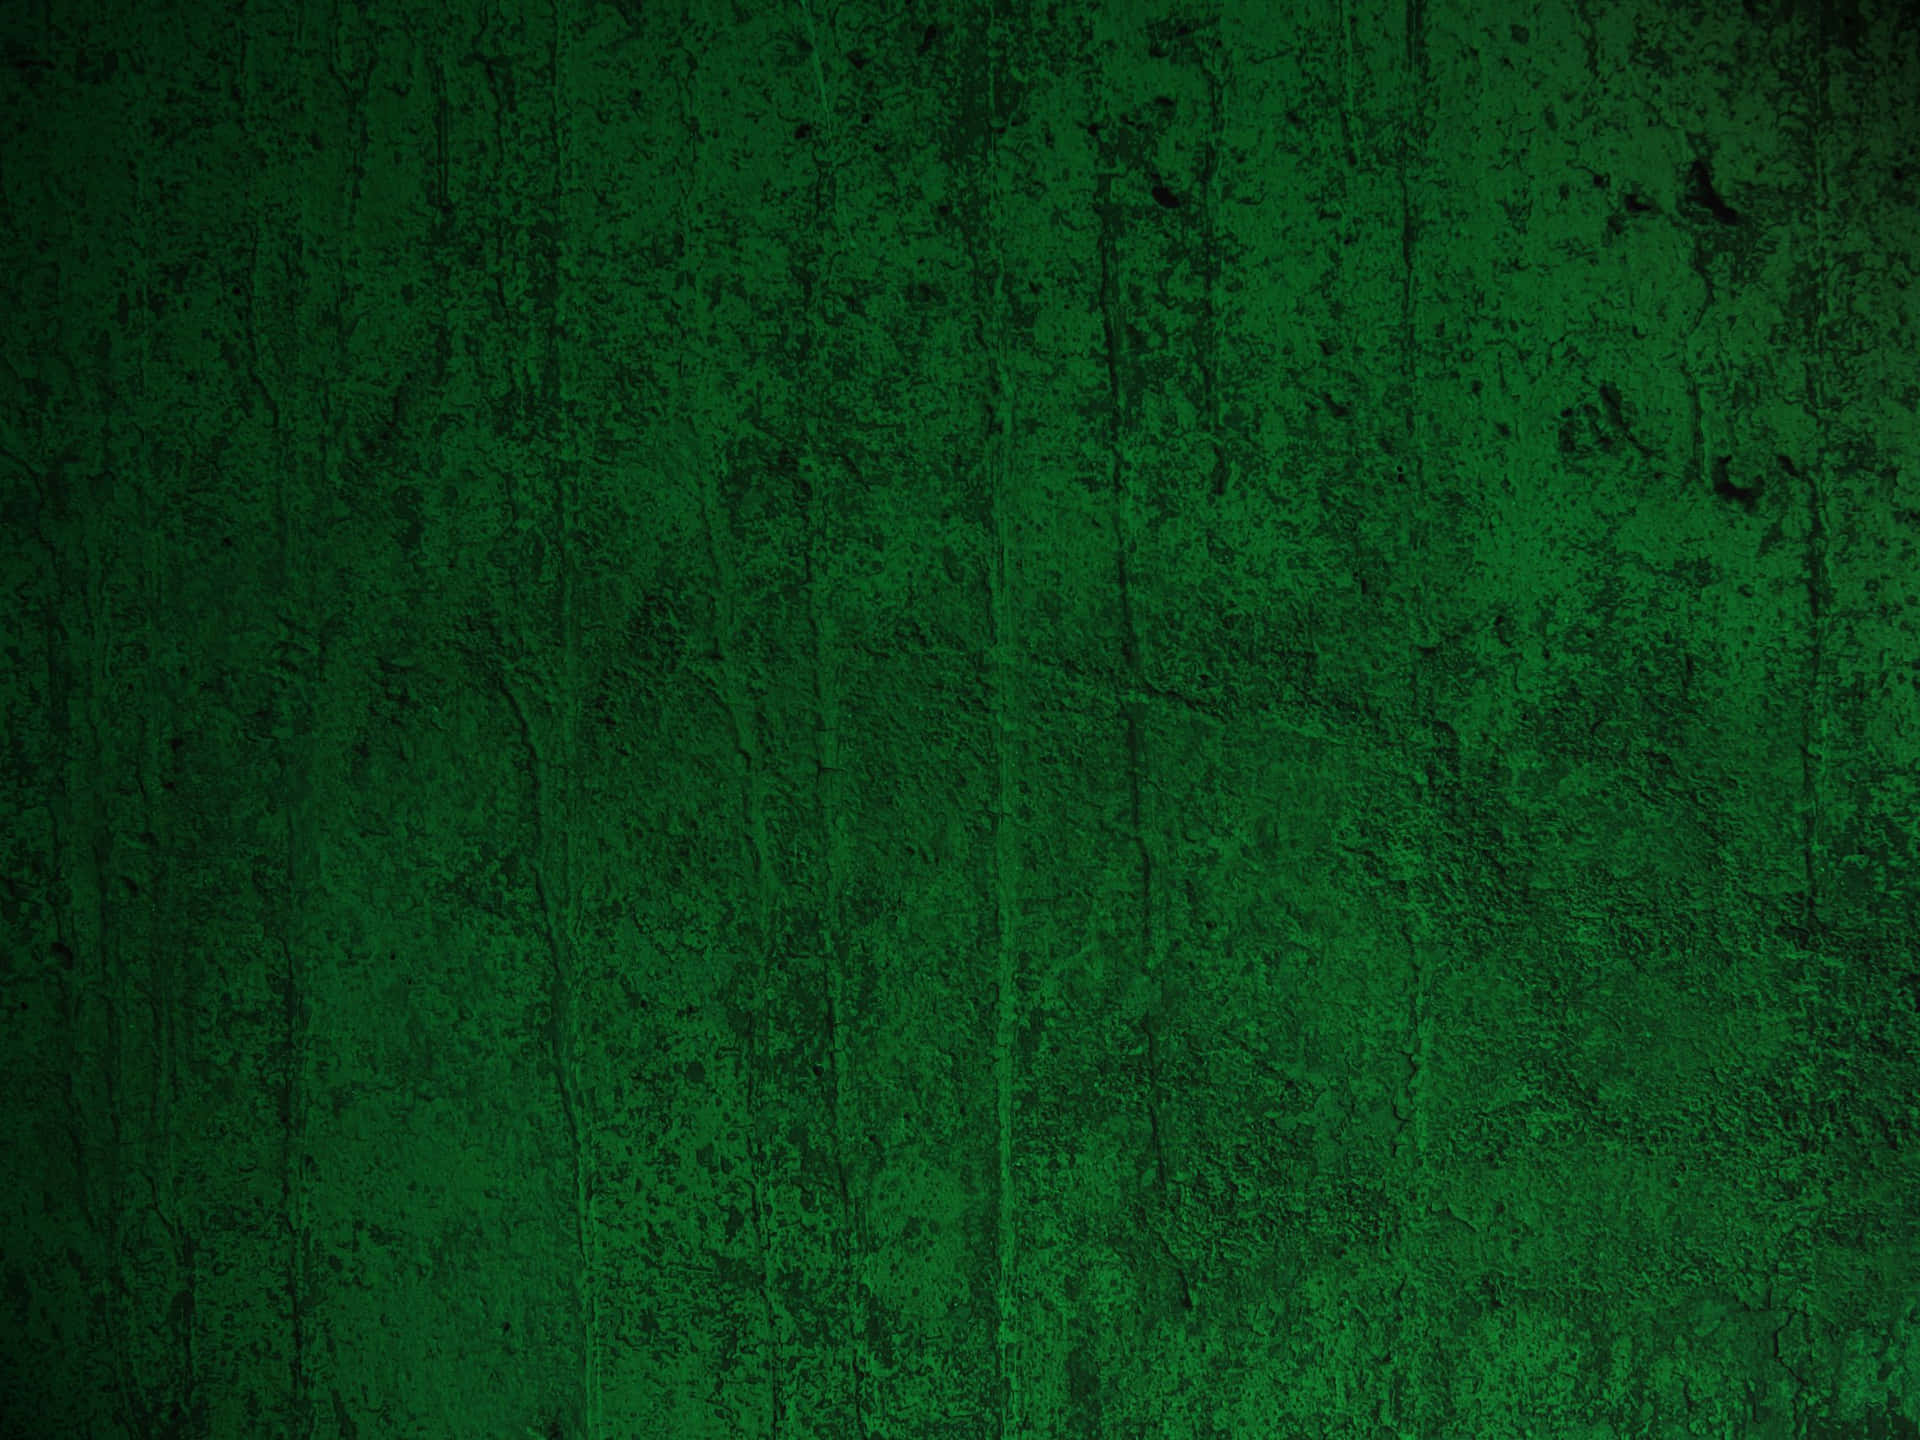 Grungy Green Wall Texture Background